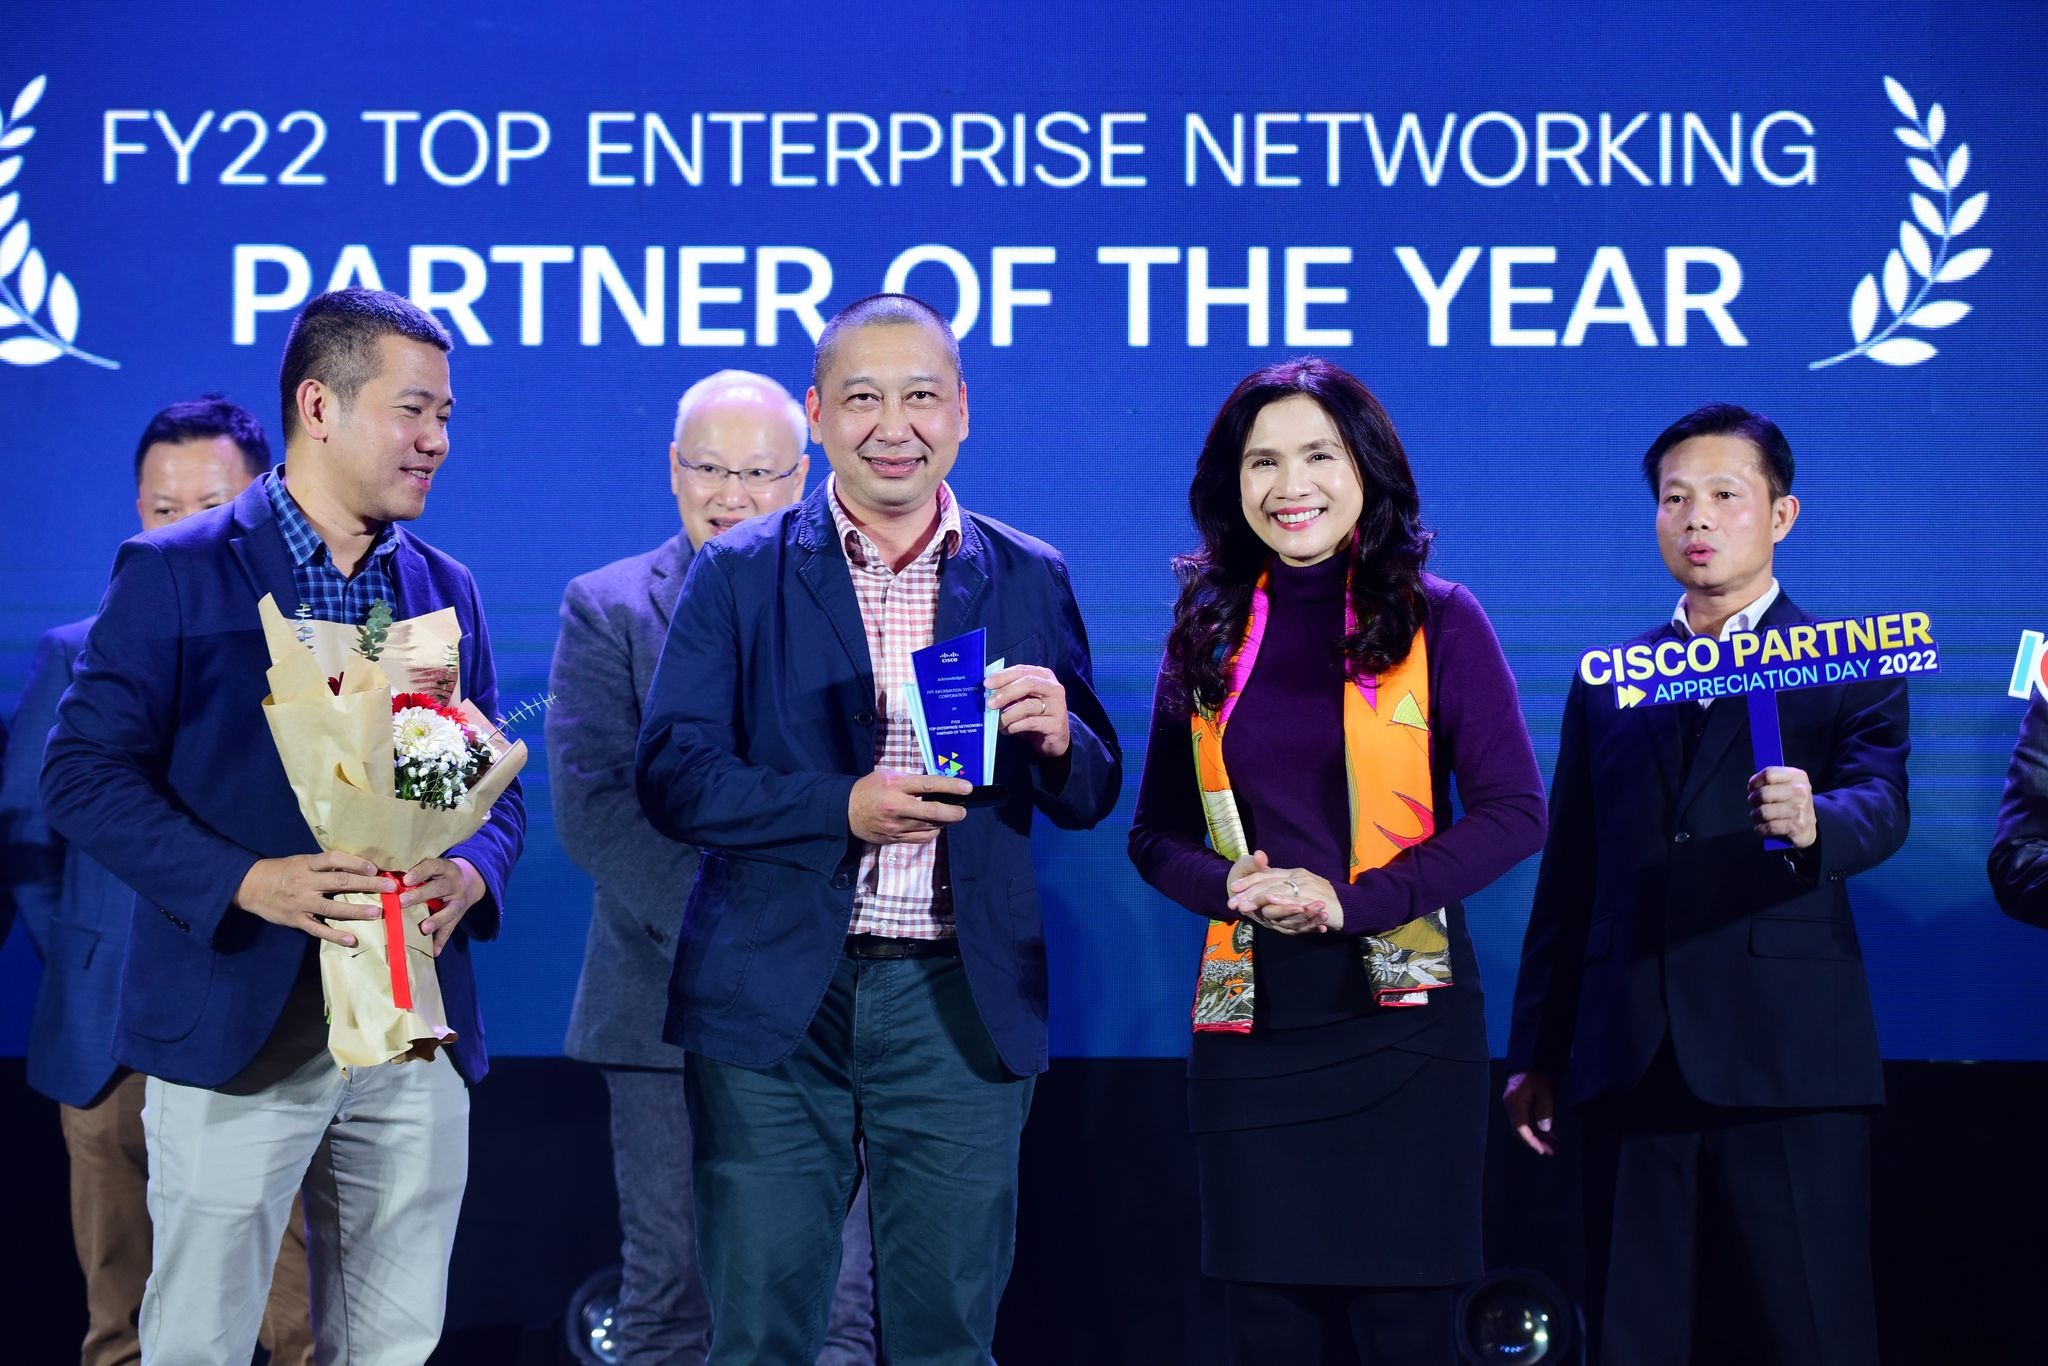 Cisco FY22 Top Enterprise Networking Partner of The Year